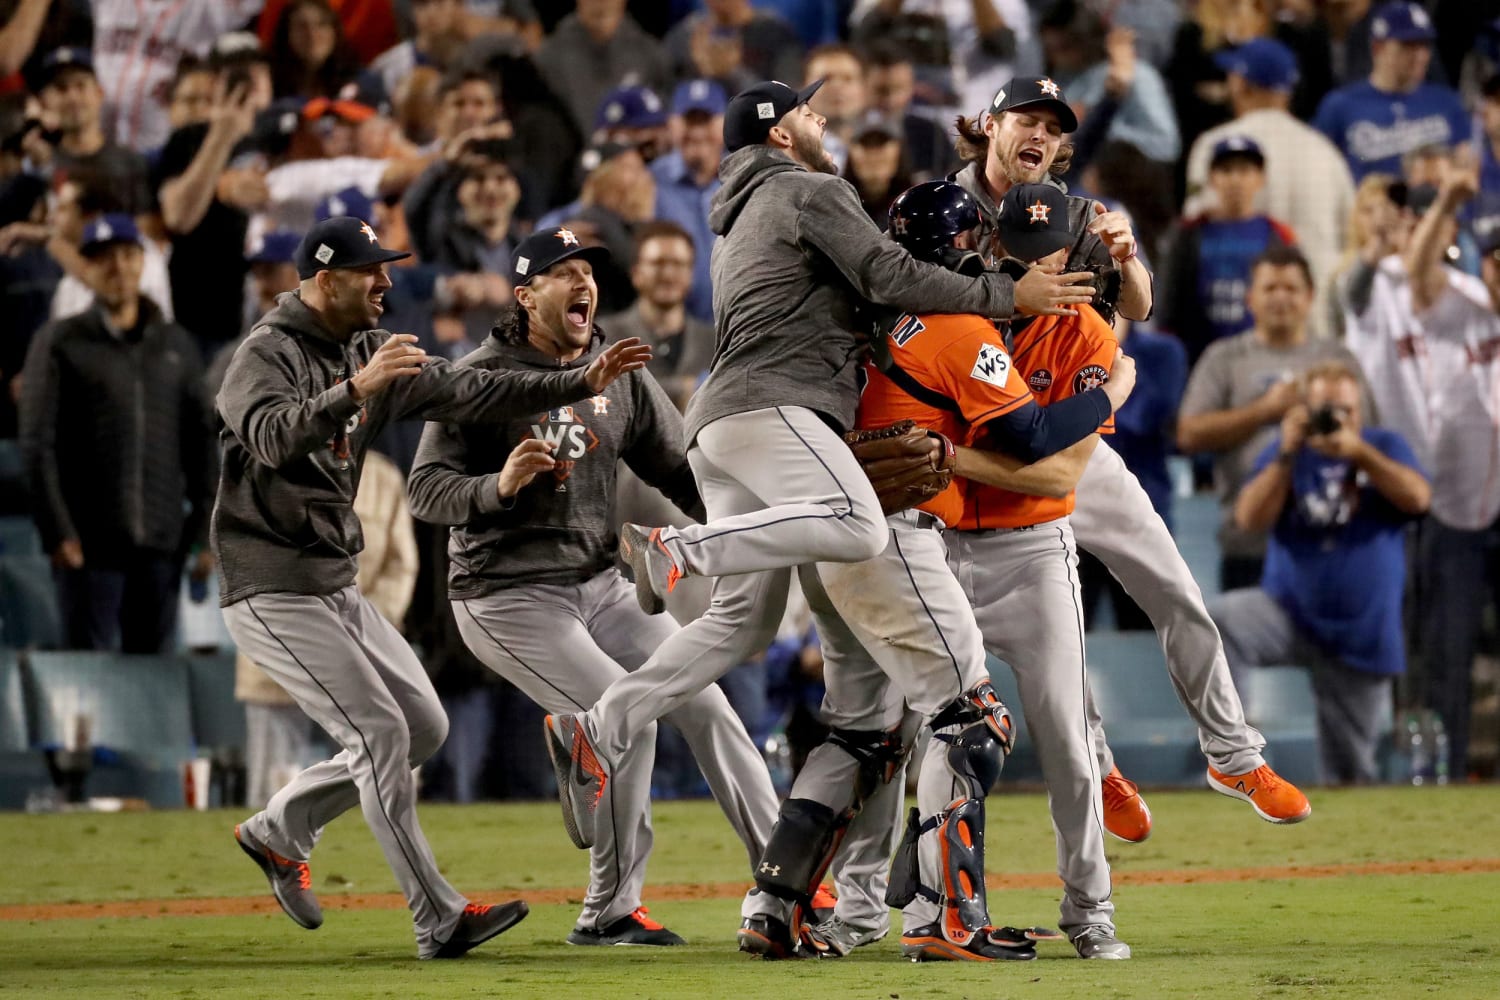 Astros win 1st World Series crown, top Dodgers 5-1 in Game 7